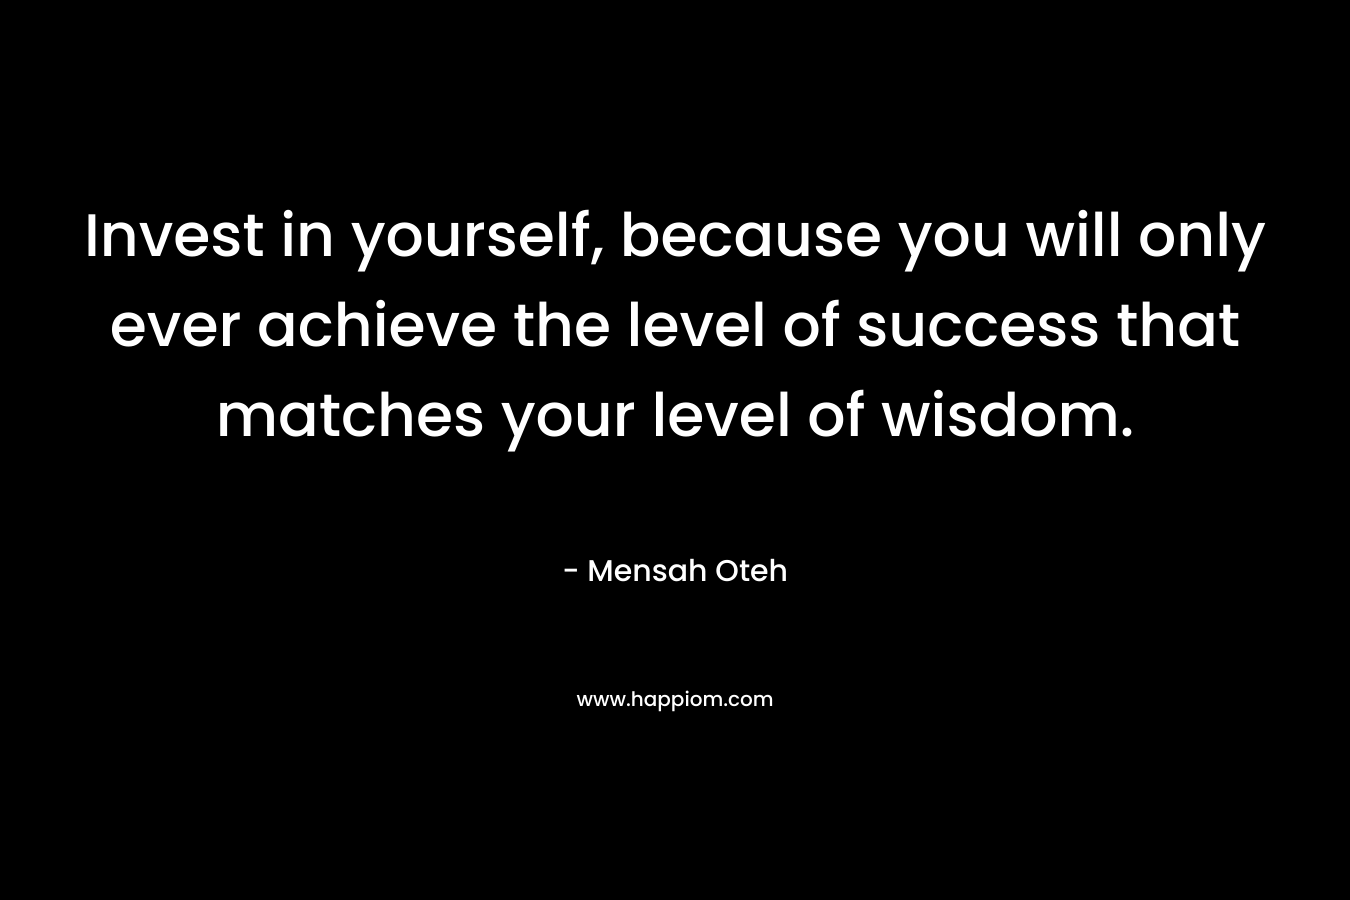 Invest in yourself, because you will only ever achieve the level of success that matches your level of wisdom.